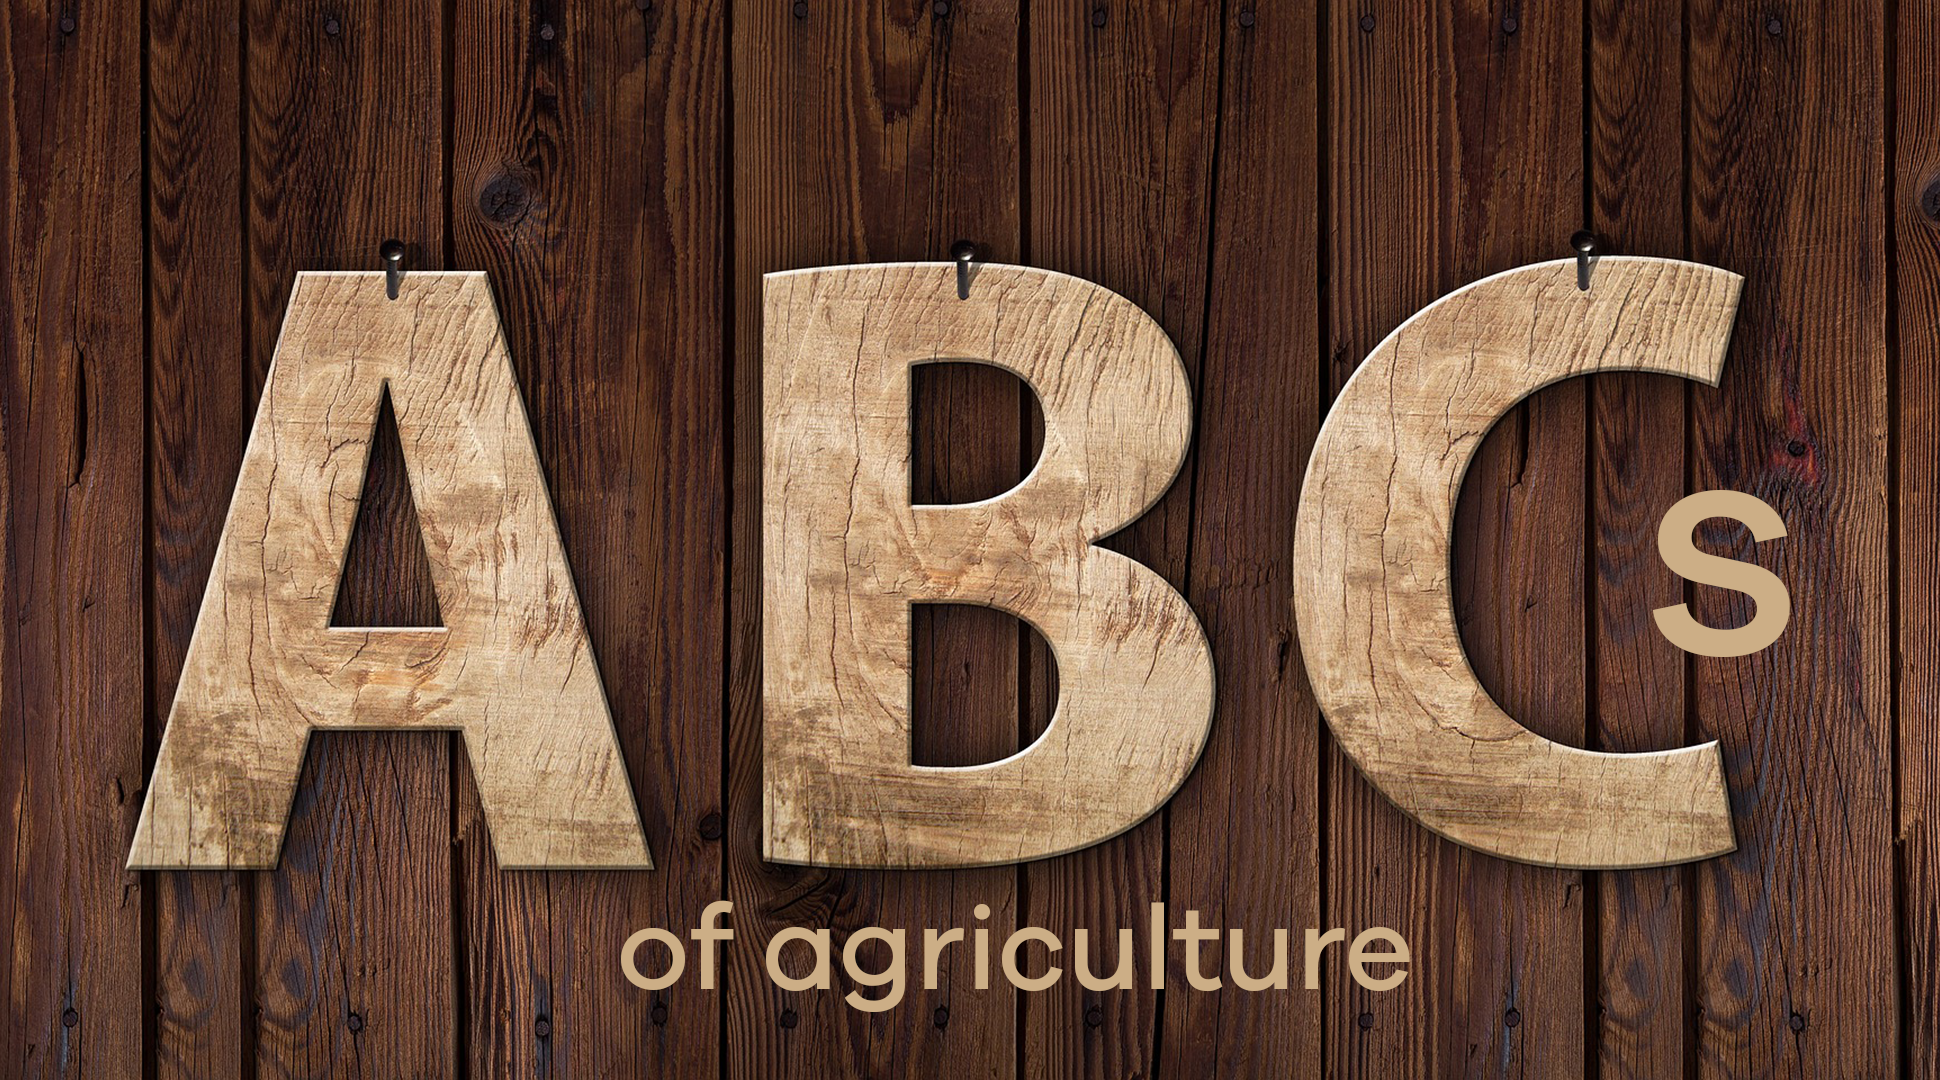 The ABCs of ag